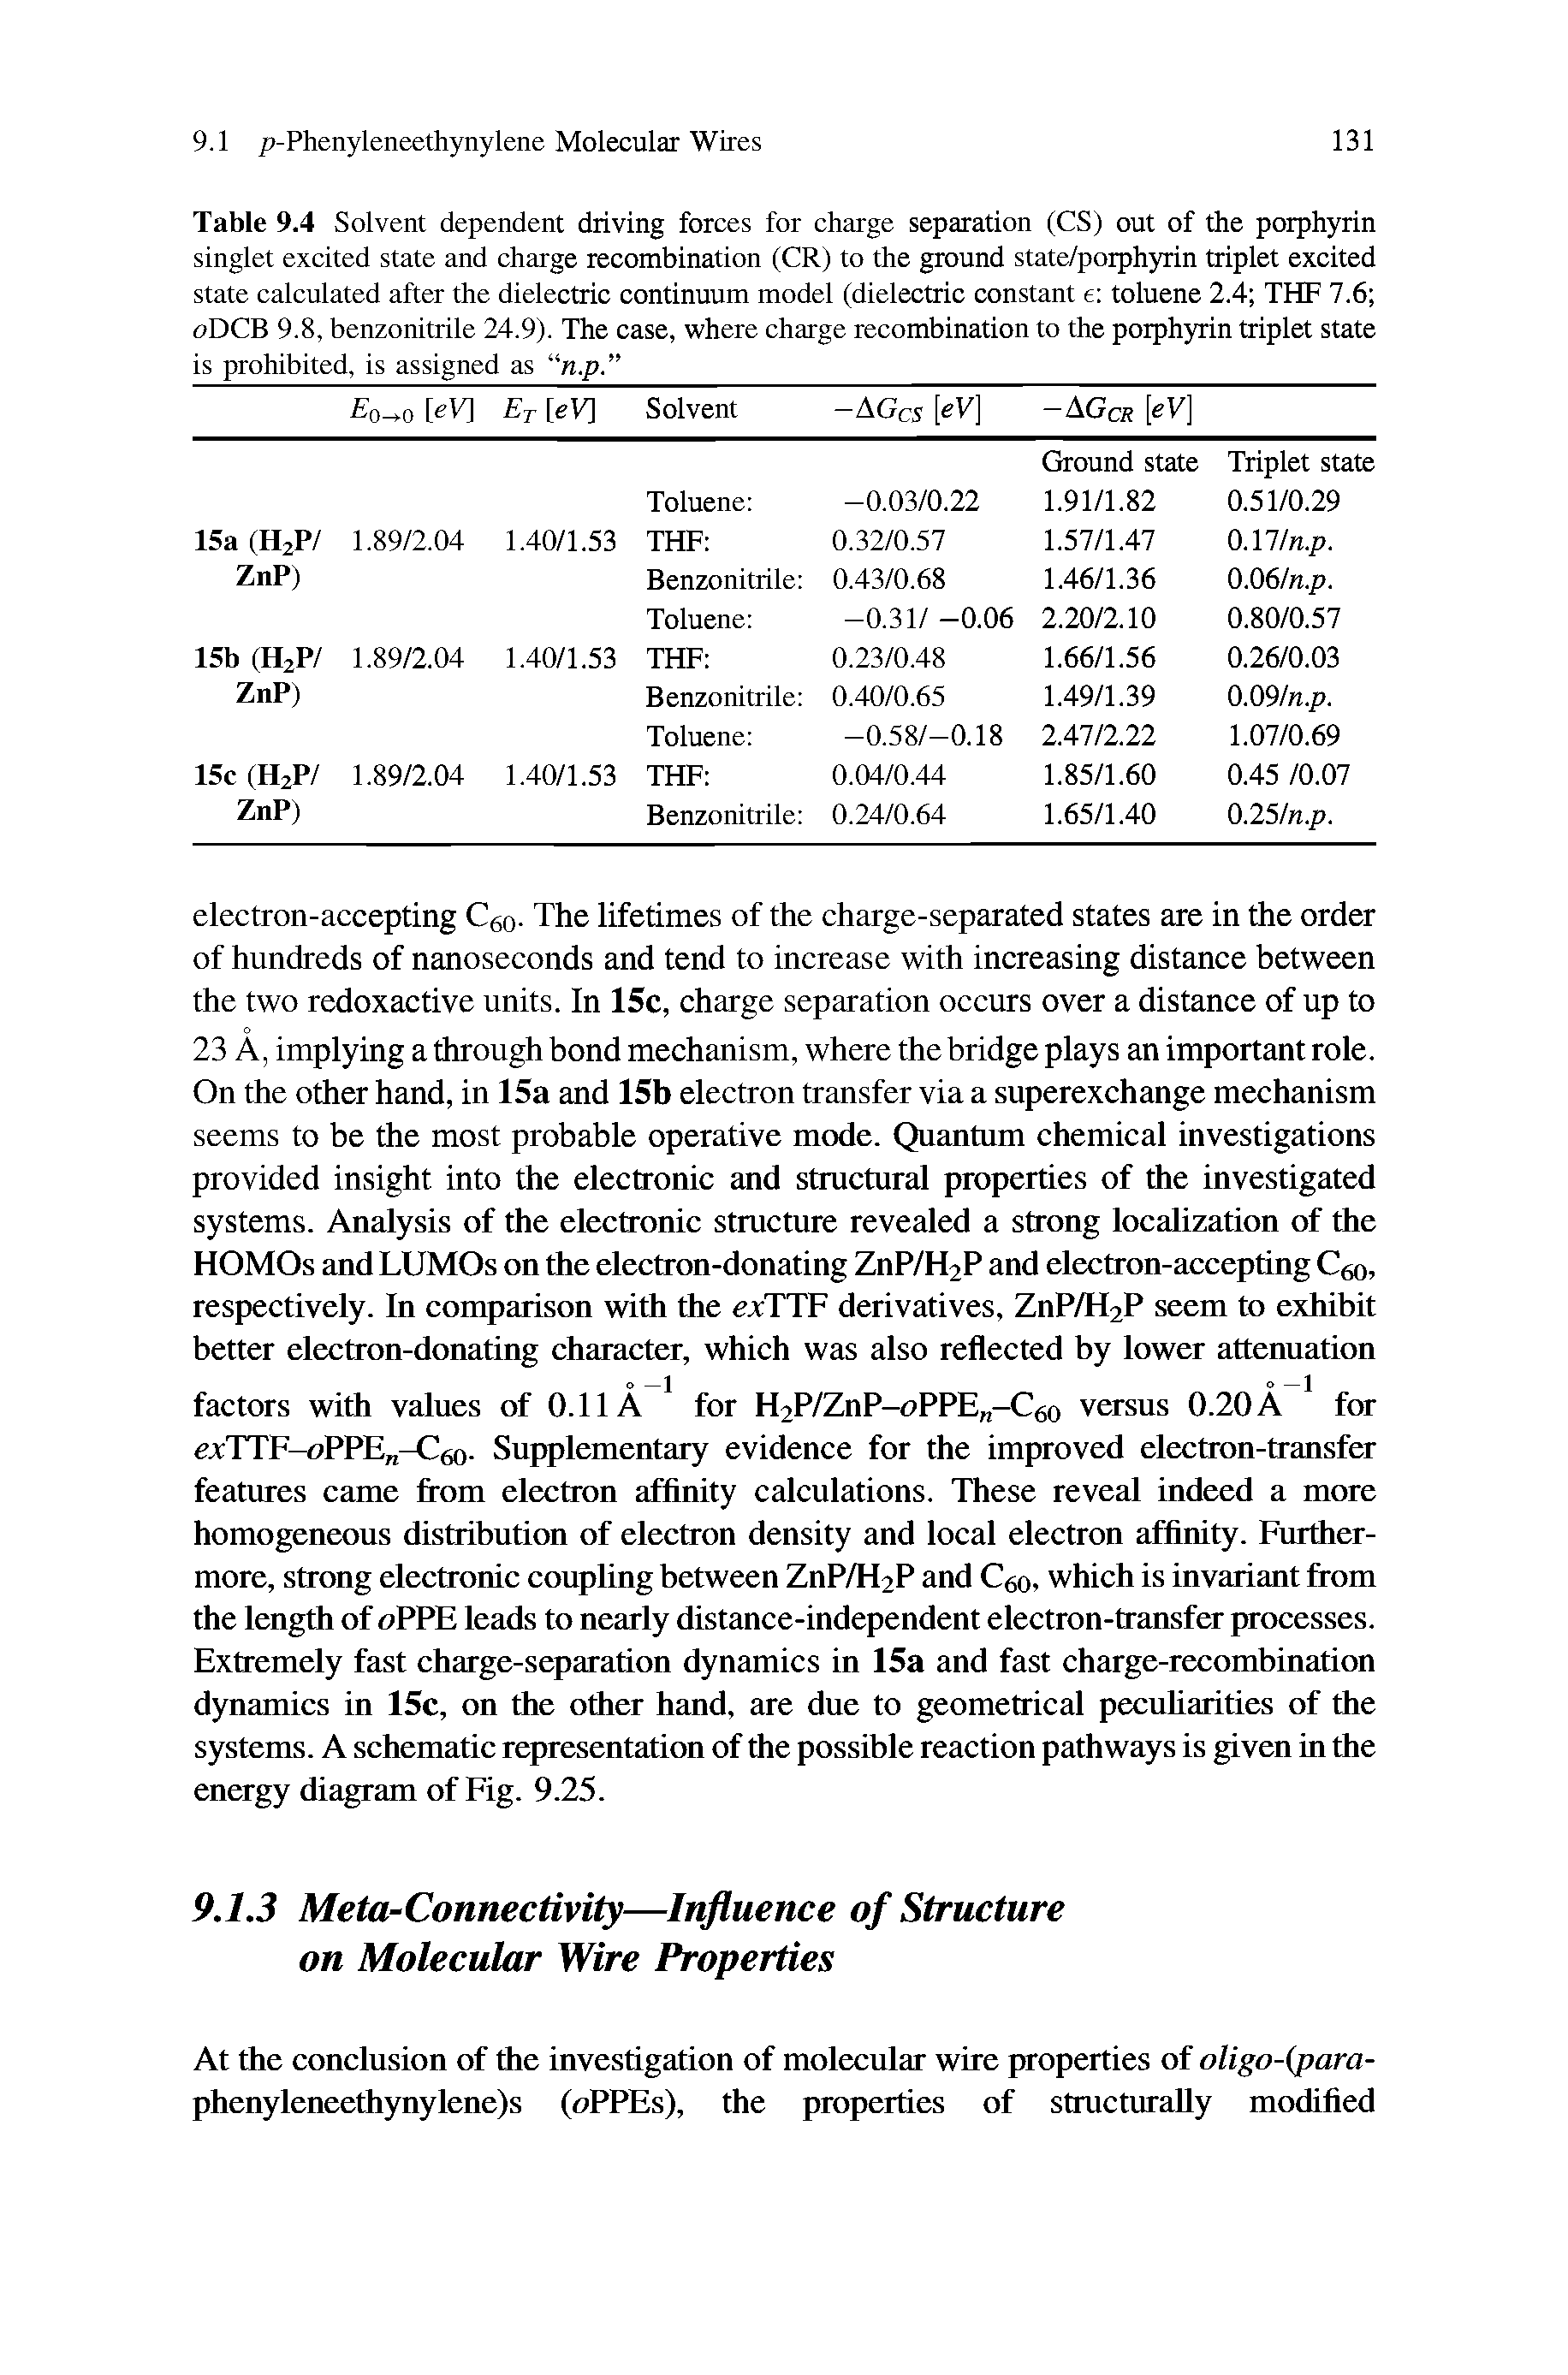 Table 9.4 Solvent dependent driving forces for charge separation (CS) out of the porphyrin singlet excited state and charge recombination (CR) to the ground state/porphyrin triplet excited state calculated after the dielectric continuum model (dielectric constant e toluene 2.4 THF 7.6 oDCB 9.8, benzonitrile 24.9). The case, where charge recombination to the porphyrin triplet state is prohibited, is assigned as n.p. ...